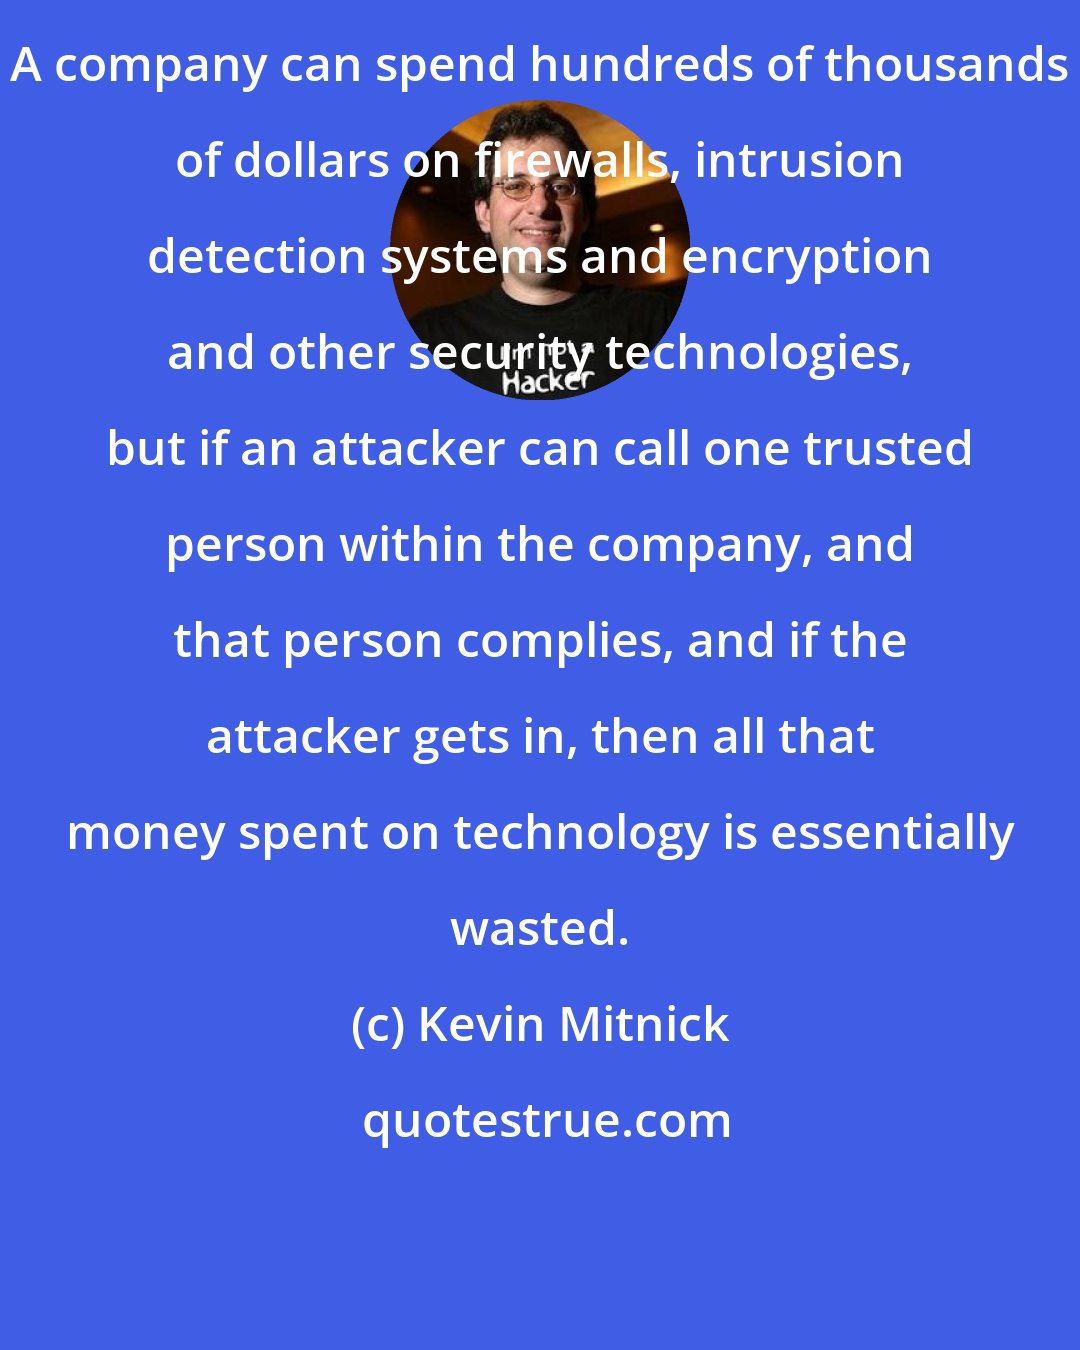 Kevin Mitnick: A company can spend hundreds of thousands of dollars on firewalls, intrusion detection systems and encryption and other security technologies, but if an attacker can call one trusted person within the company, and that person complies, and if the attacker gets in, then all that money spent on technology is essentially wasted.